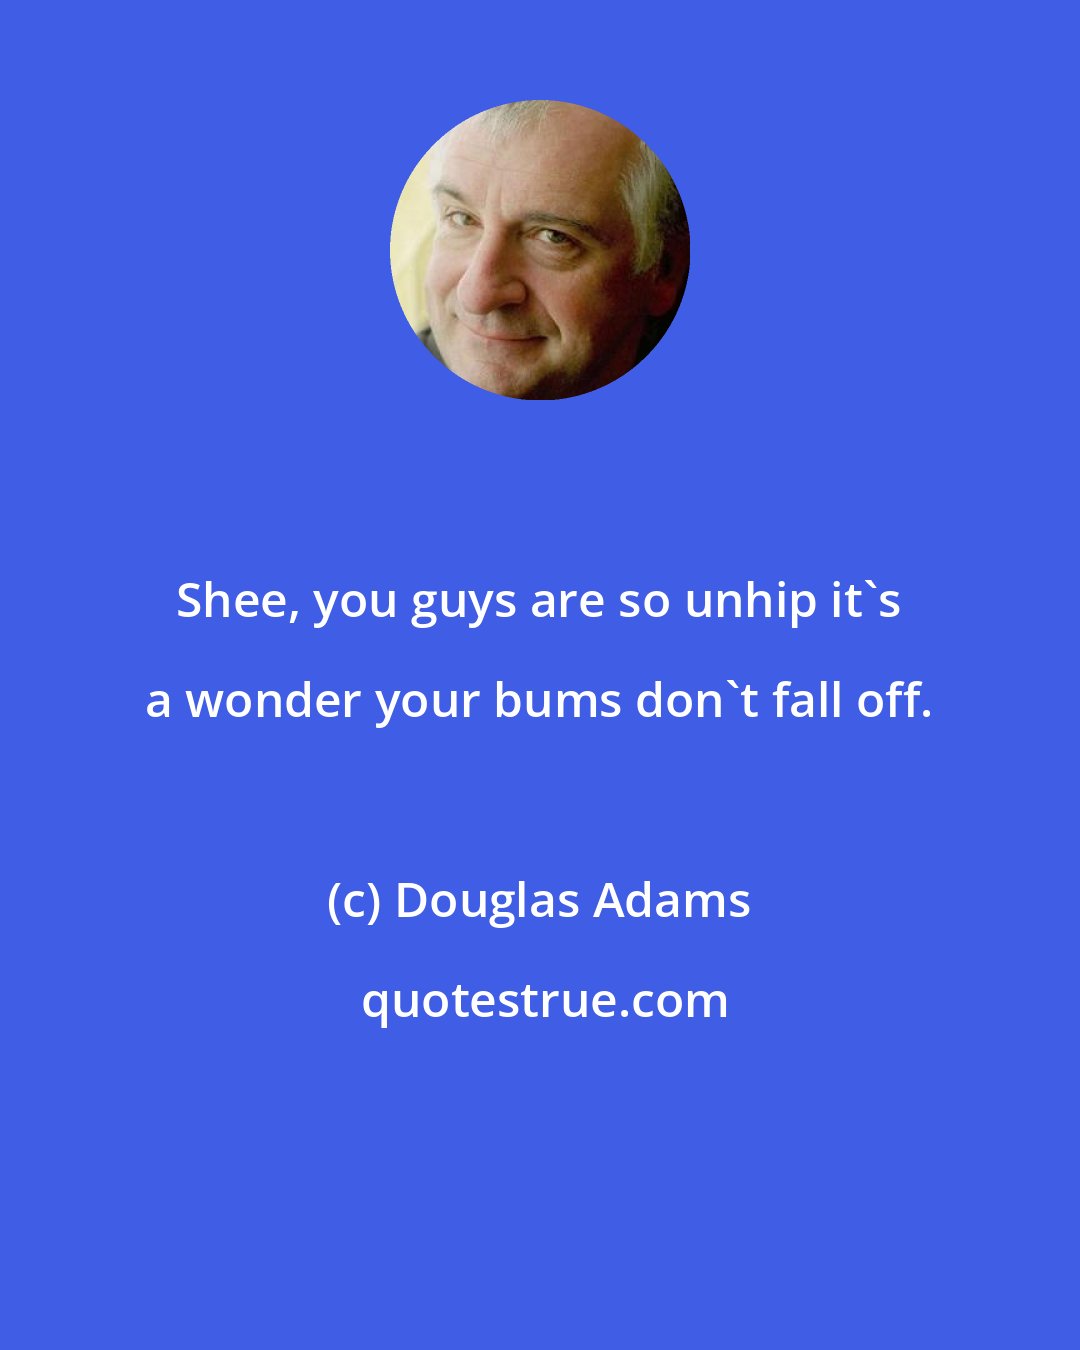 Douglas Adams: Shee, you guys are so unhip it's a wonder your bums don't fall off.